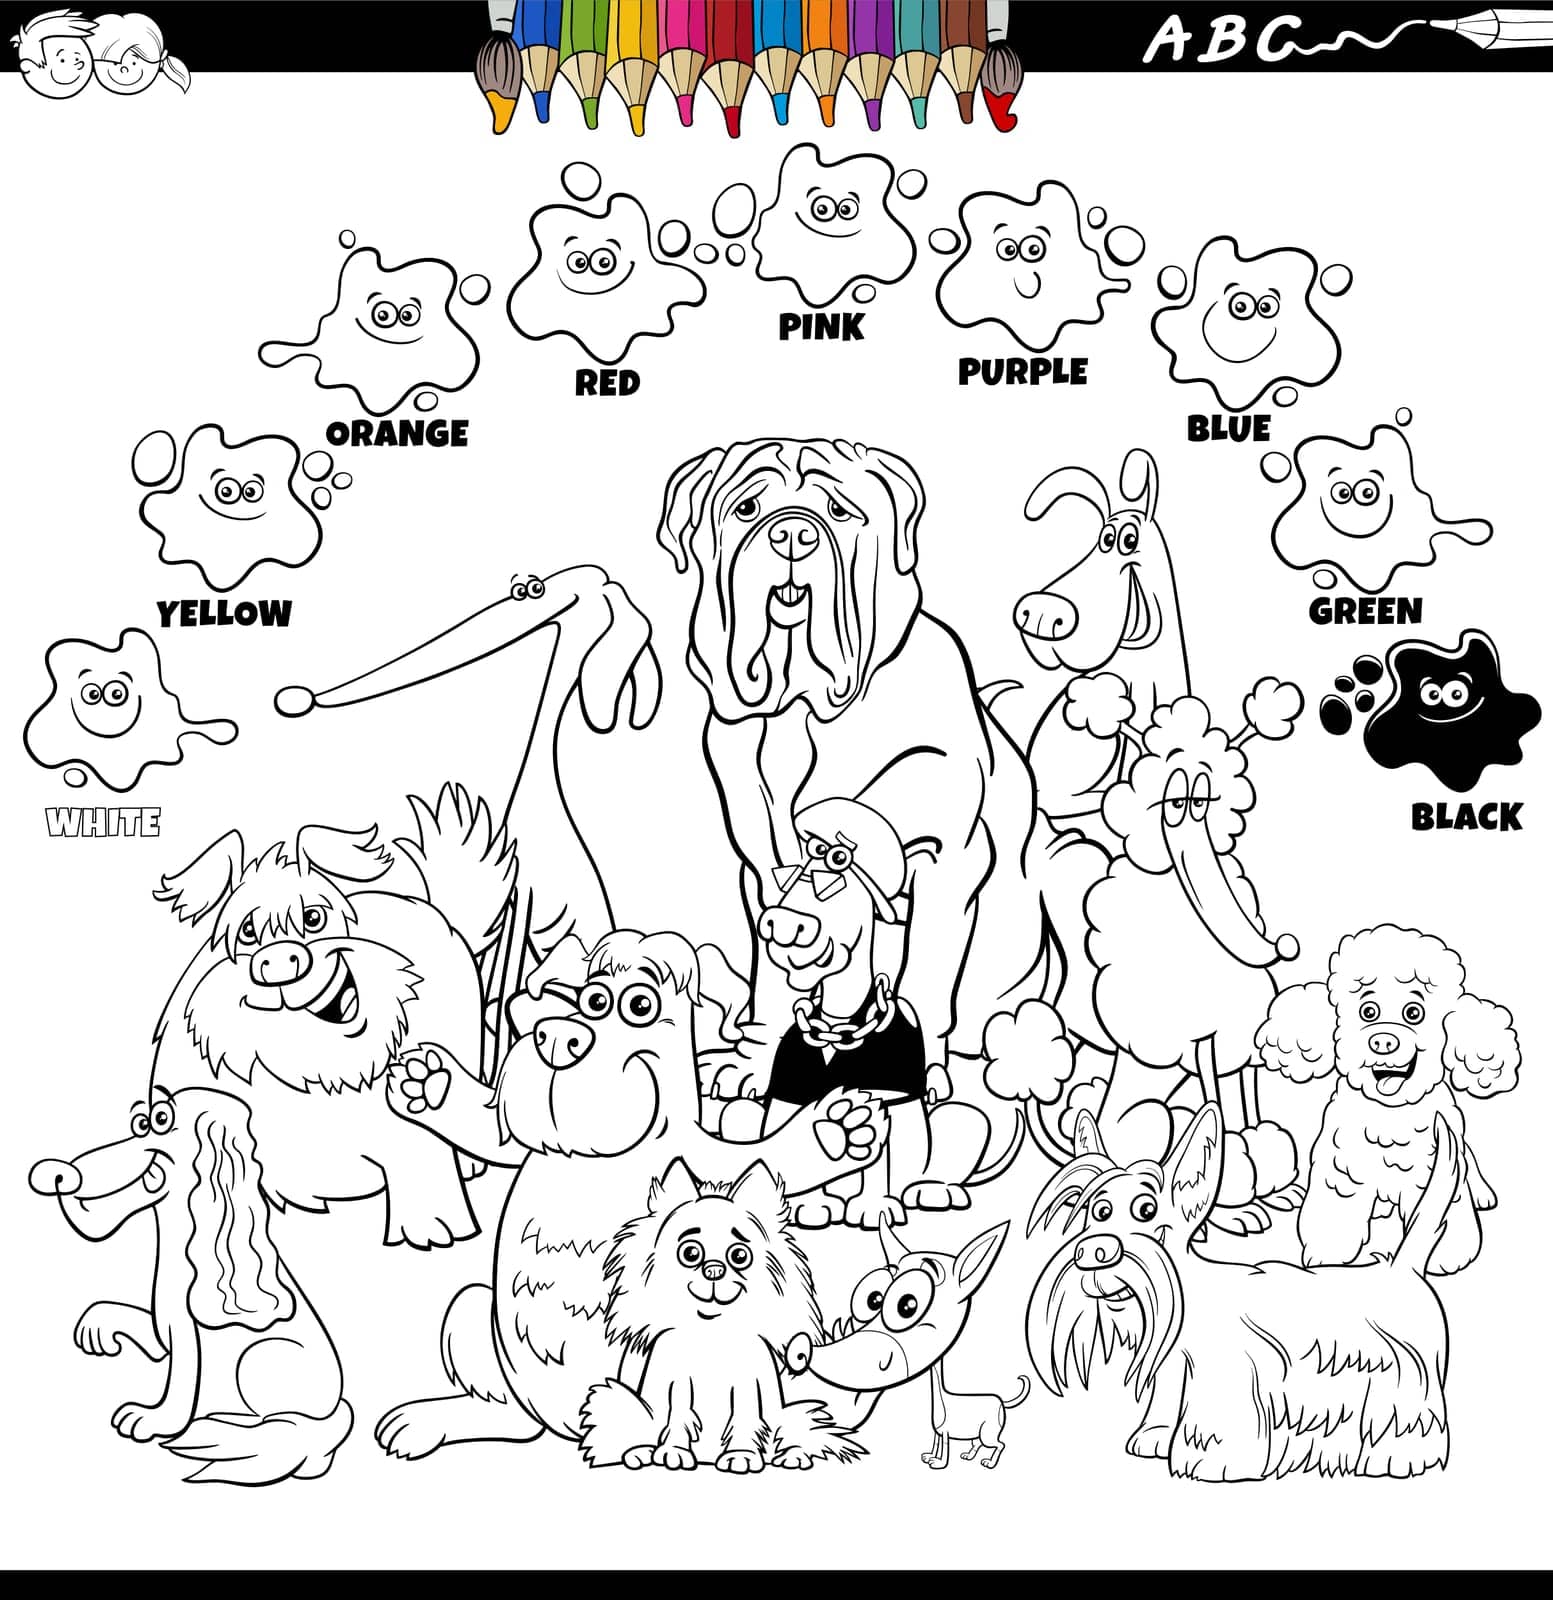 basic colors with cartoon dogs coloring page by izakowski